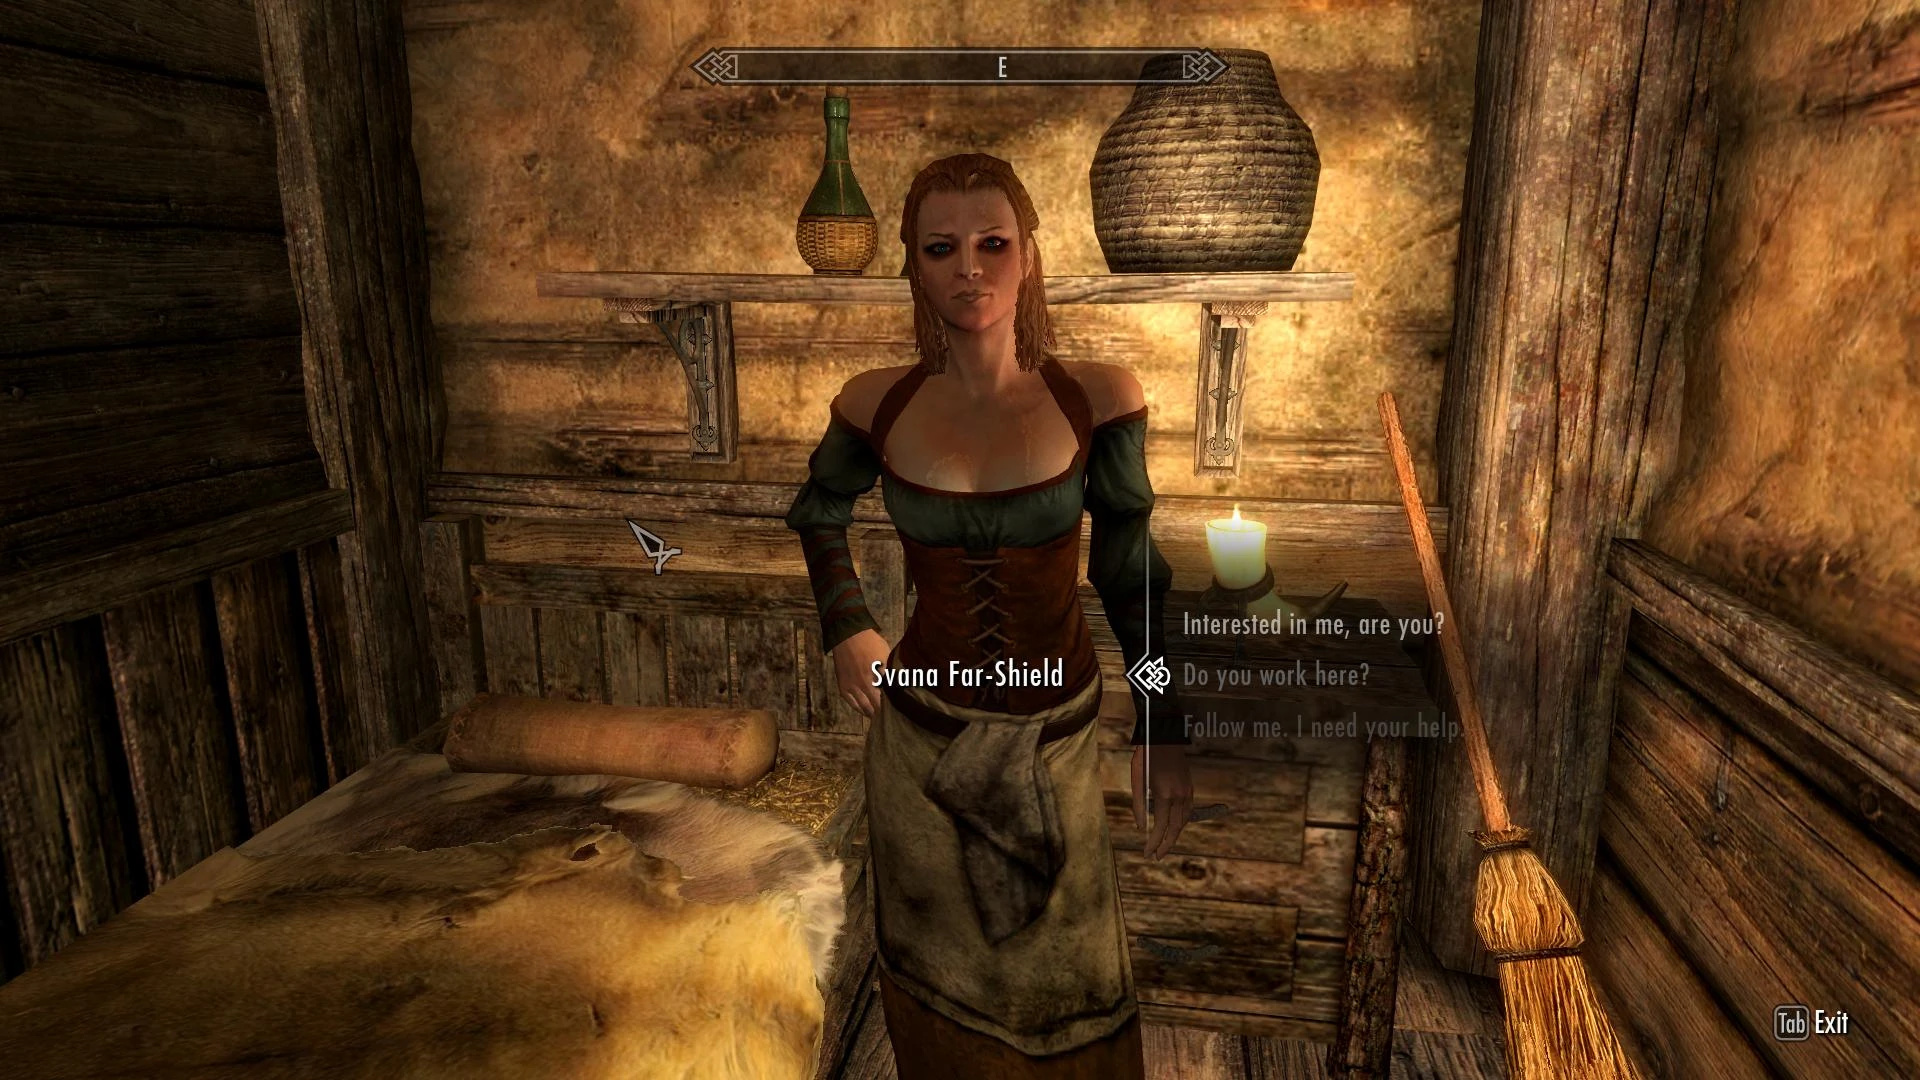 New marriage Options and Better vanilla wives at Skyrim Nexus - mods.